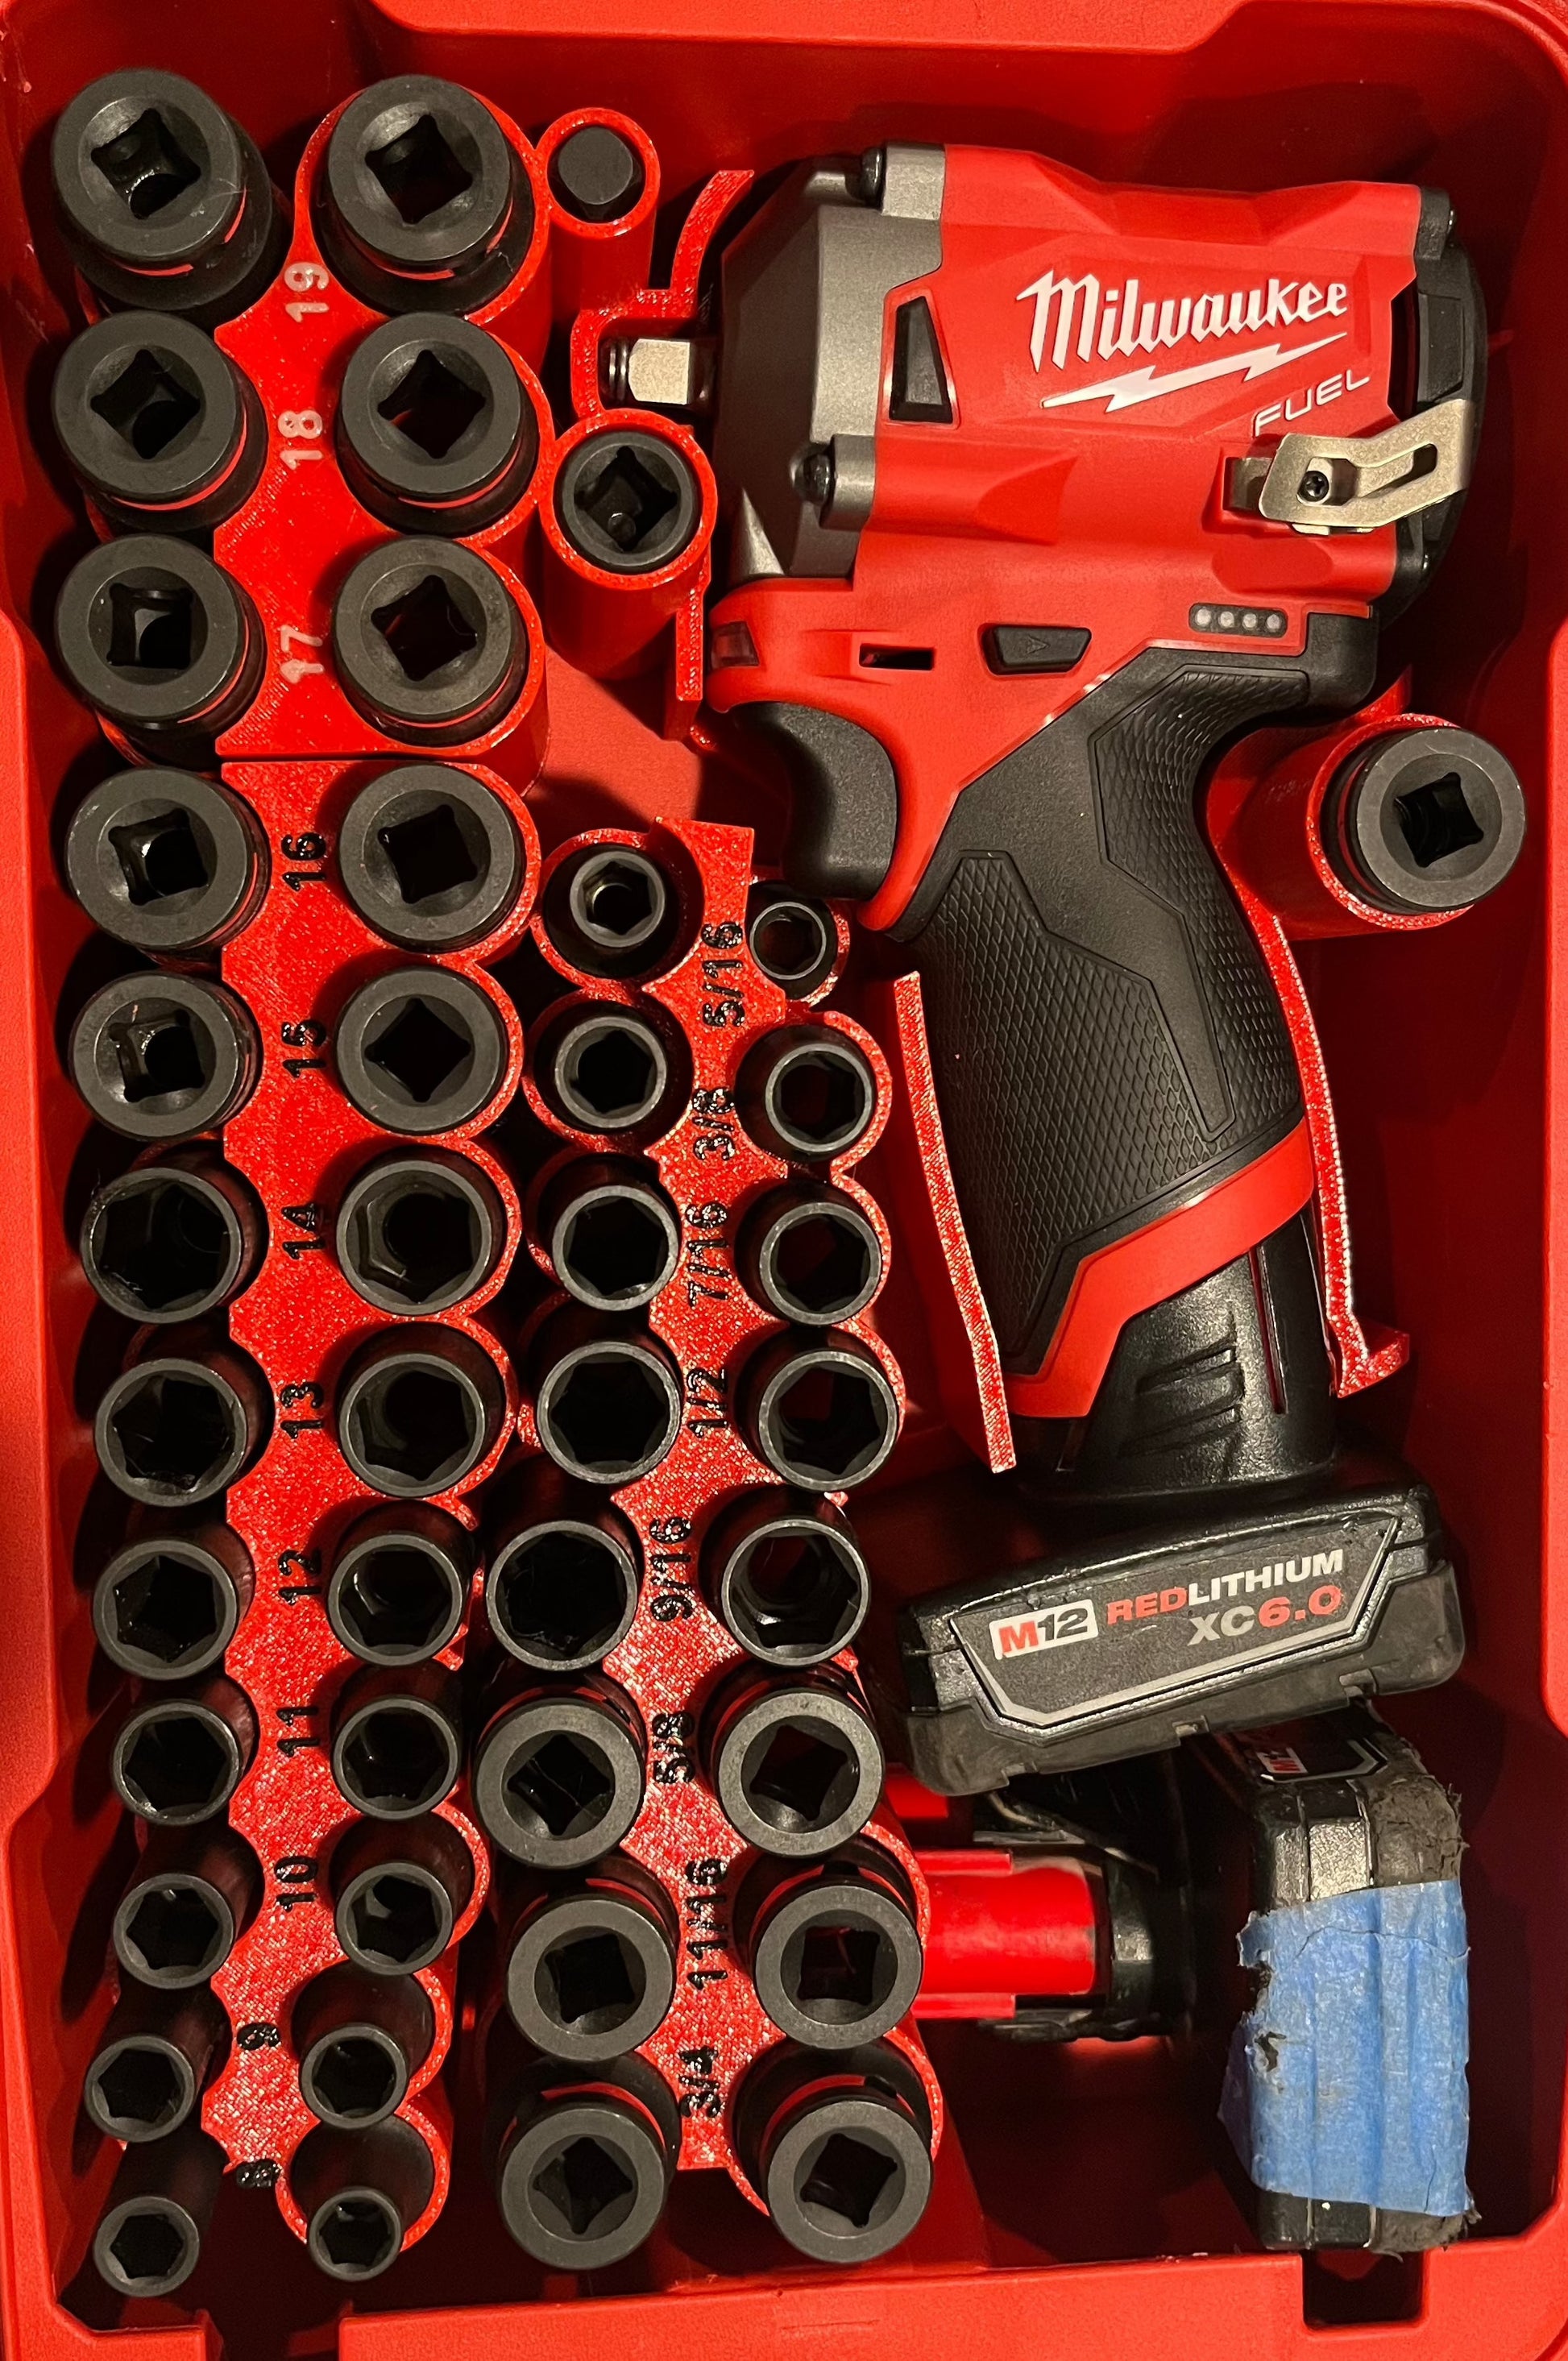 Milwaukee Drill and Impact Driver Set – Which One To Buy - Pro